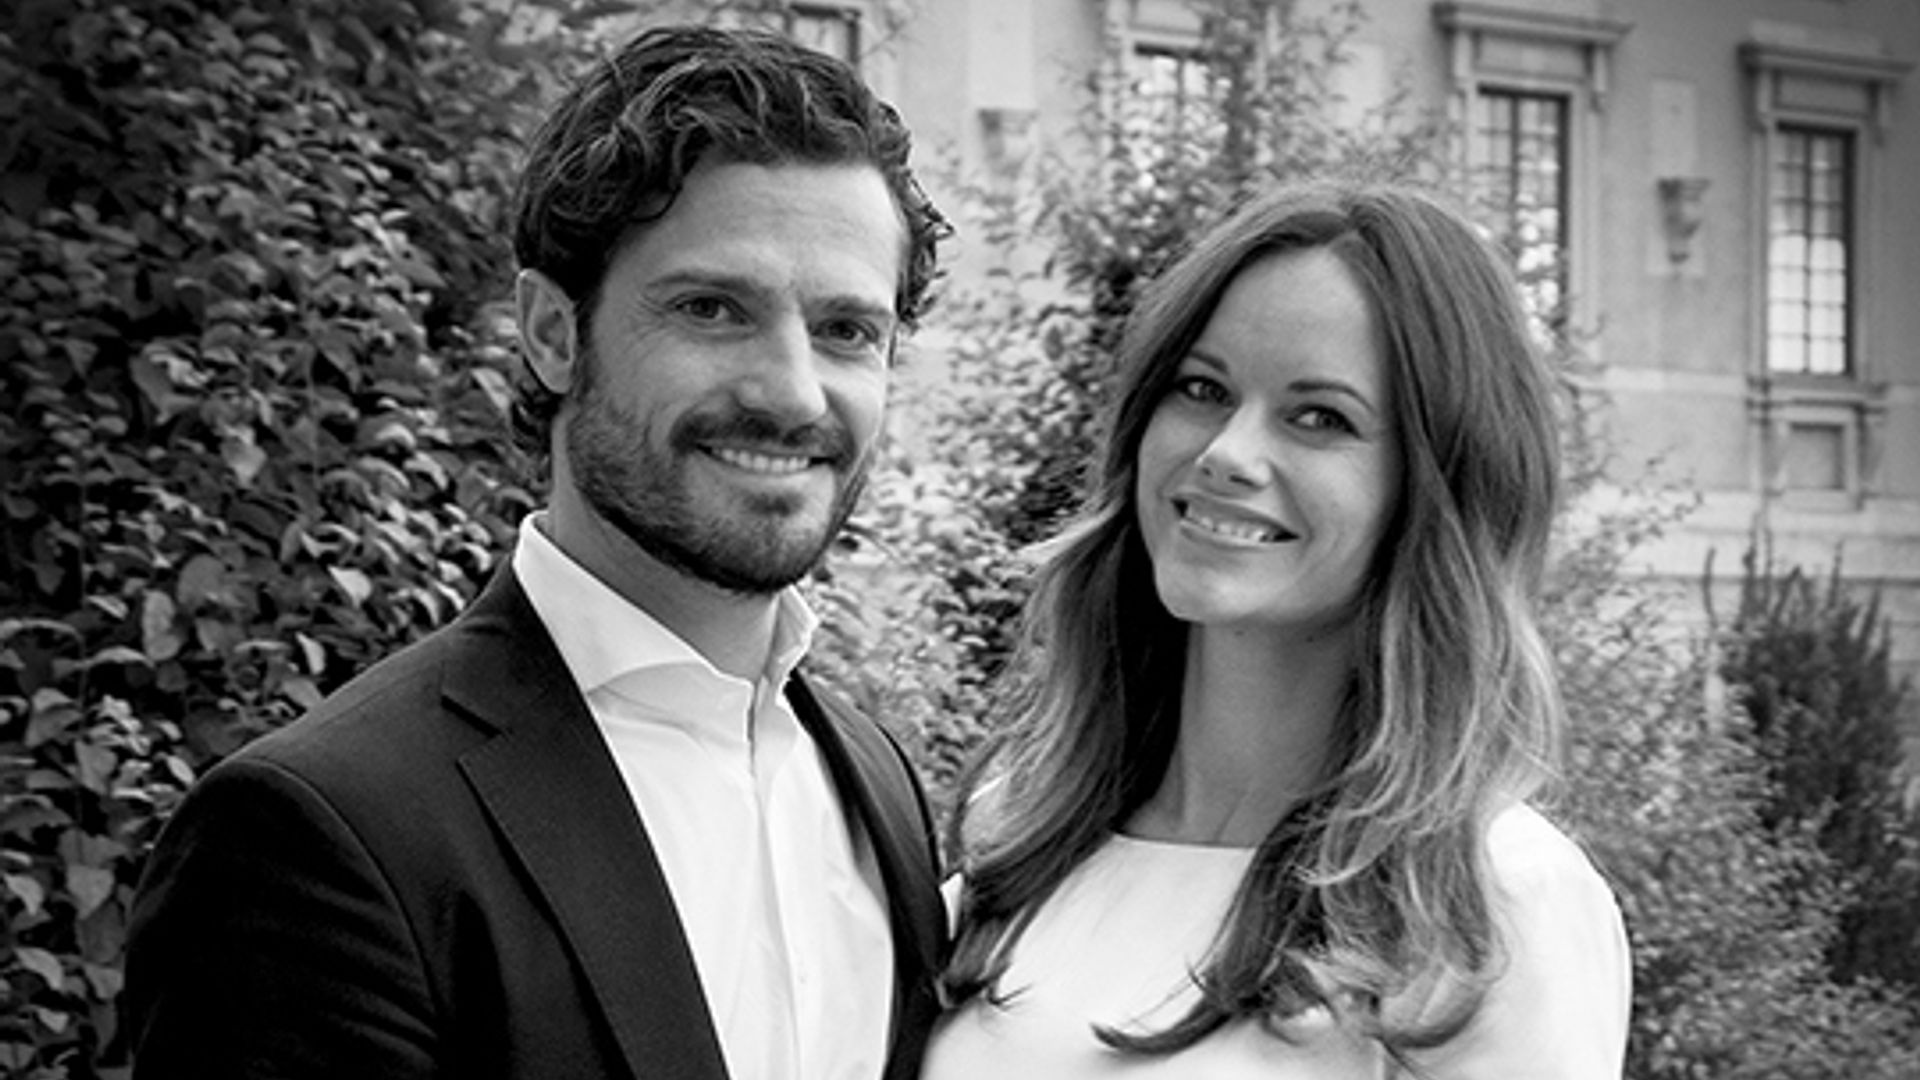 Prince Carl Philip and Princess Sofia of Sweden expecting first child